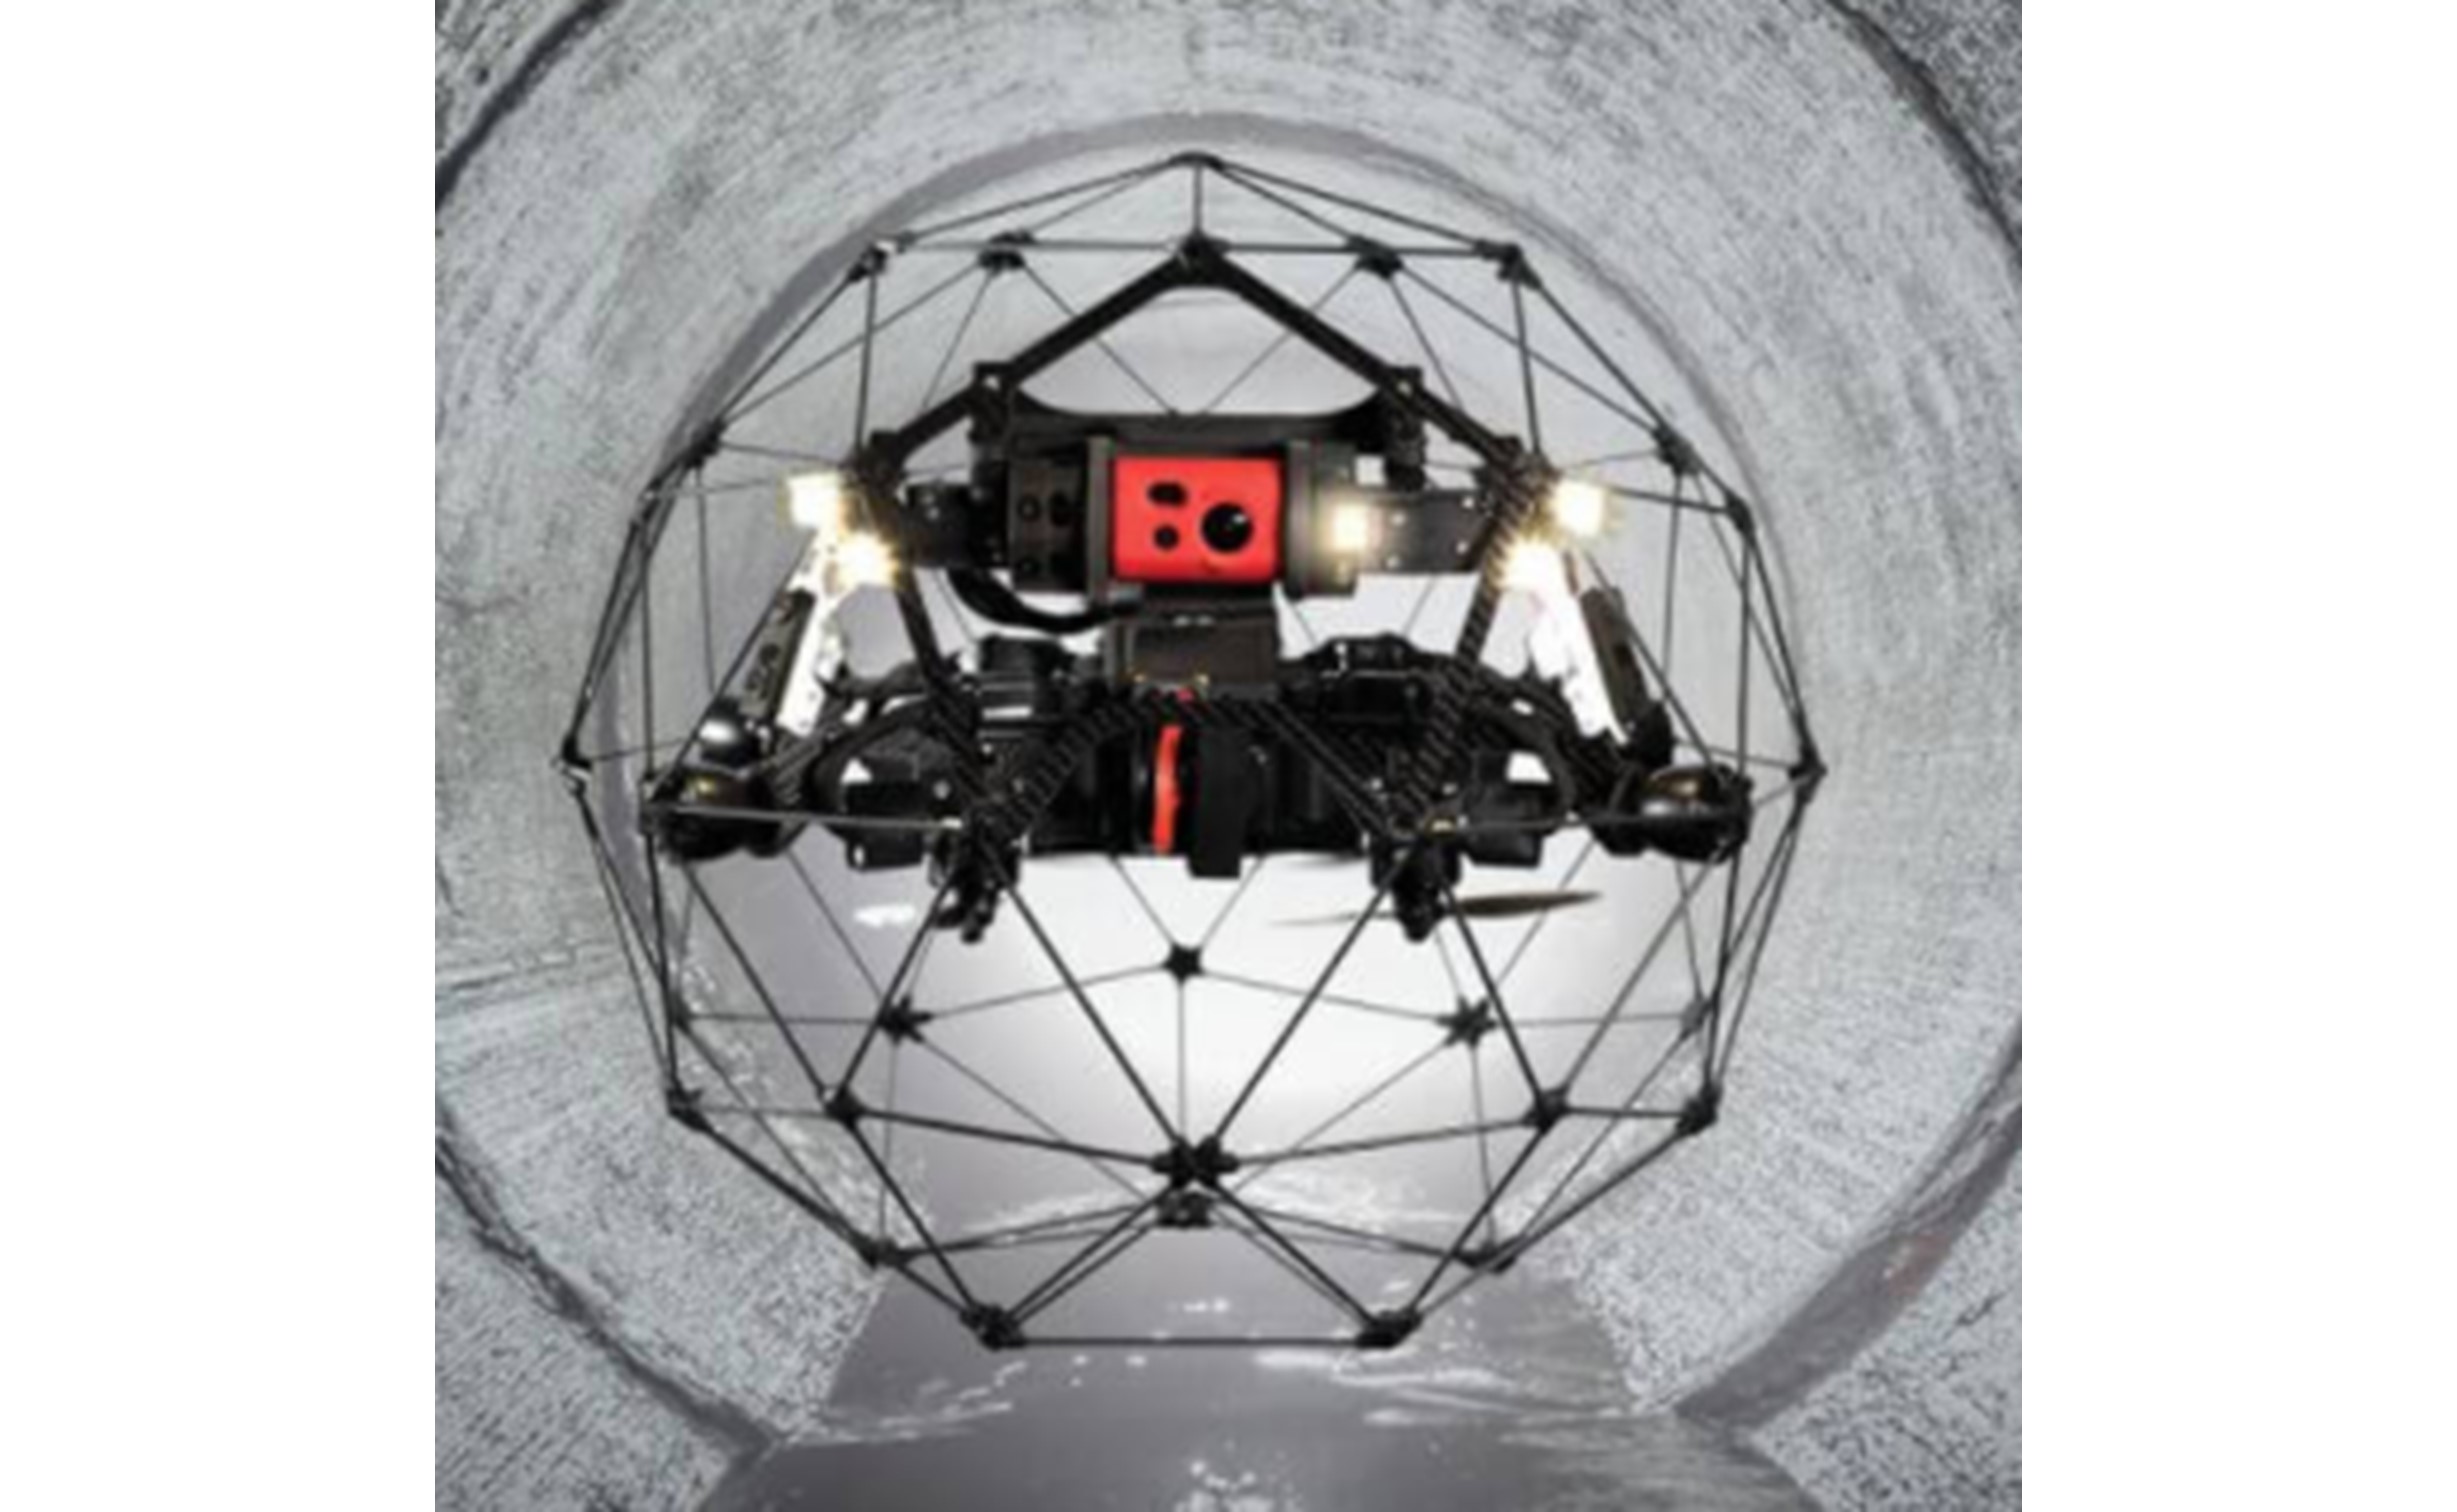 ELIOS 2 internal and confined space inspection drone